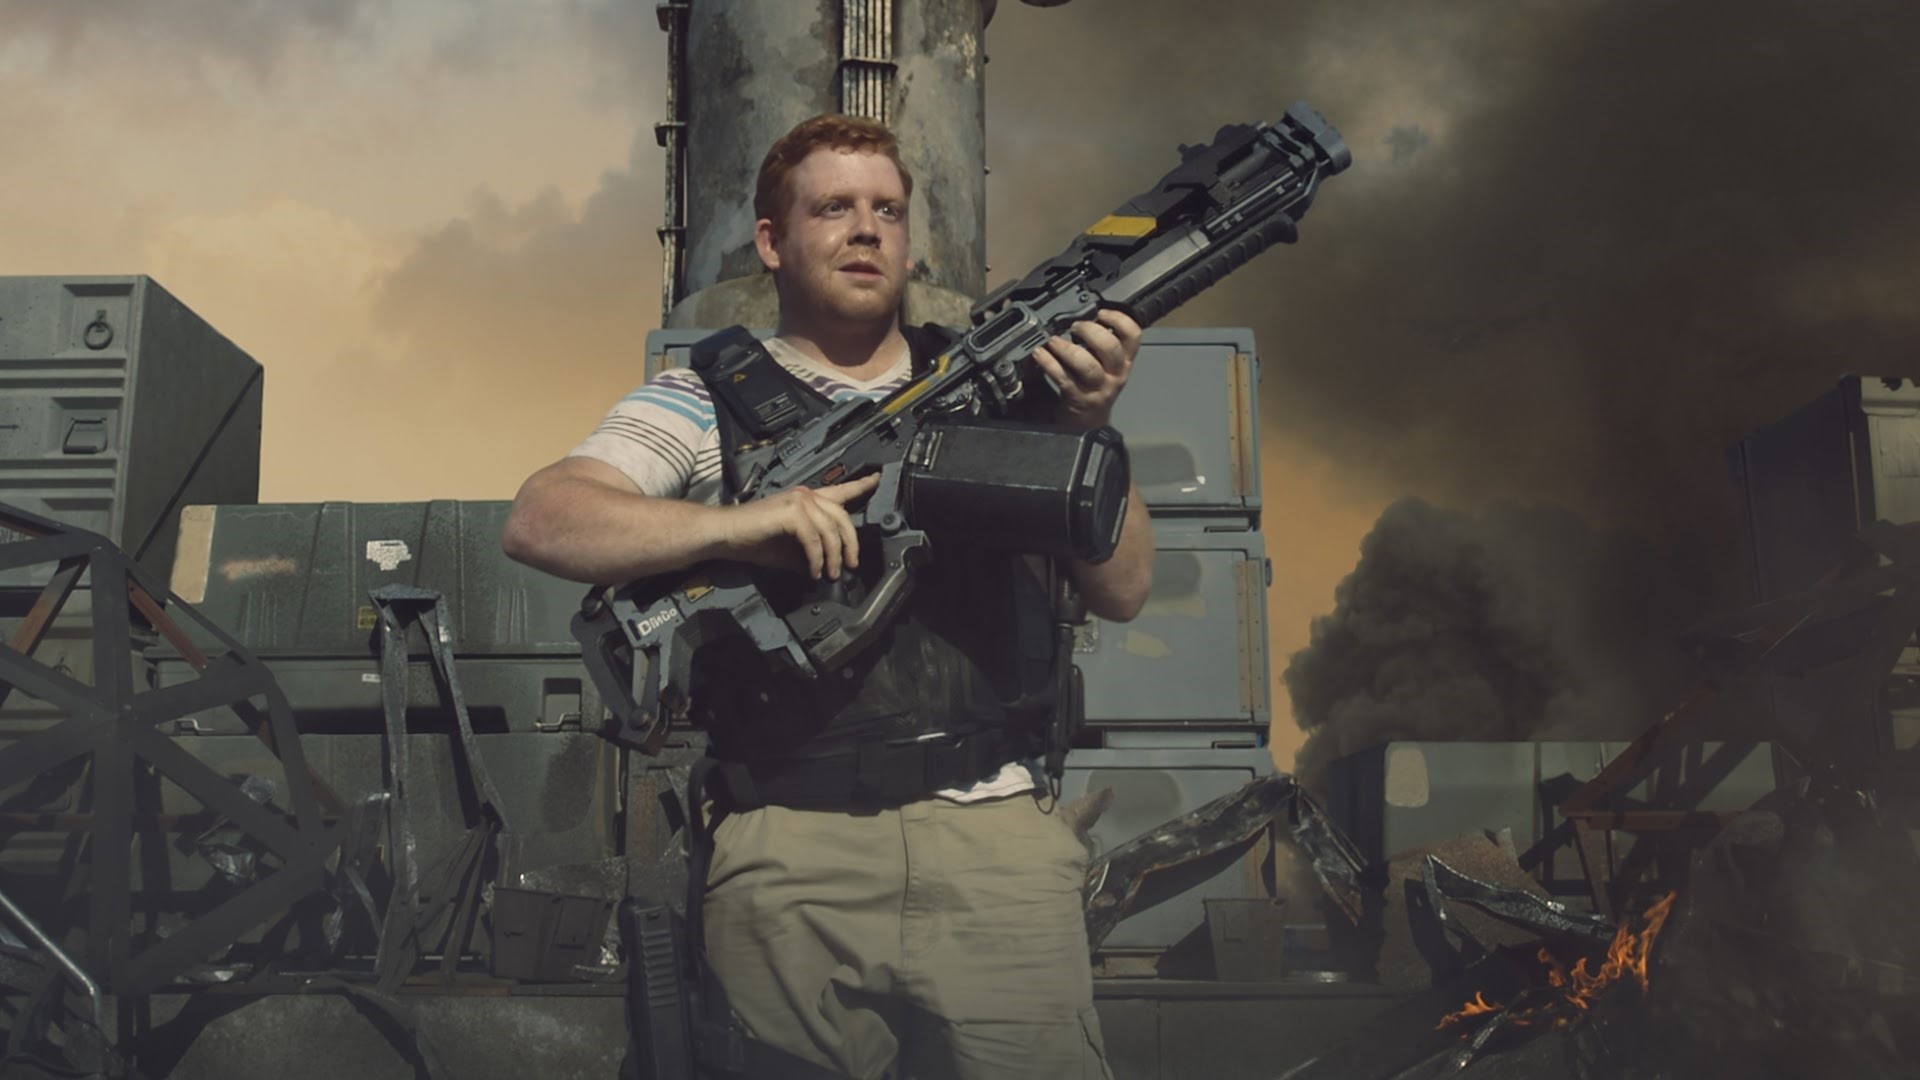 1920x1080 MPC, 72andSunny Seize Glory with 'Call Of Duty: Black Ops III' Trailer |  Animation World Network